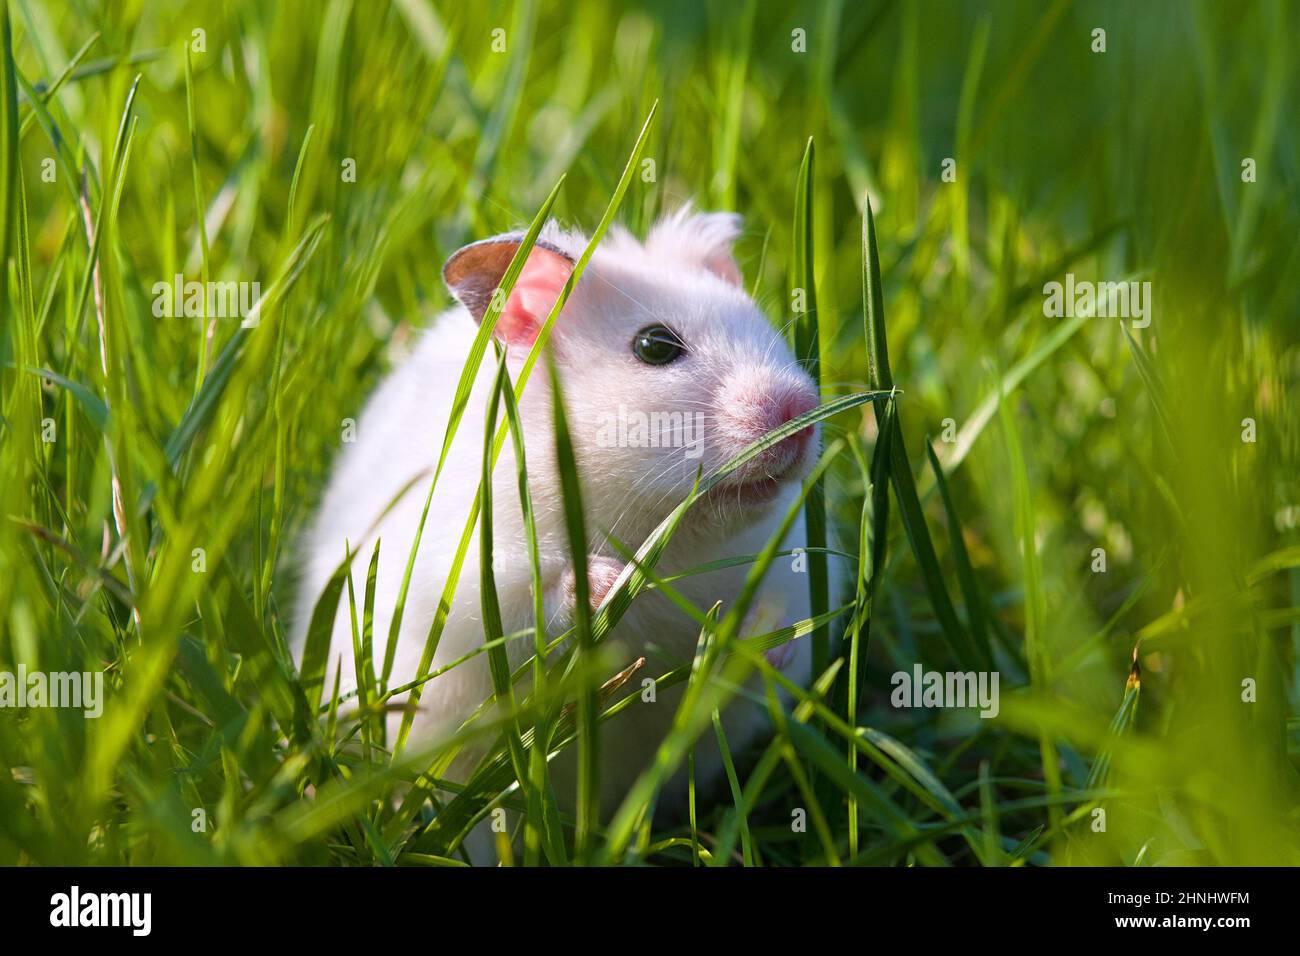 white hamster on lawn closeup Stock Photo